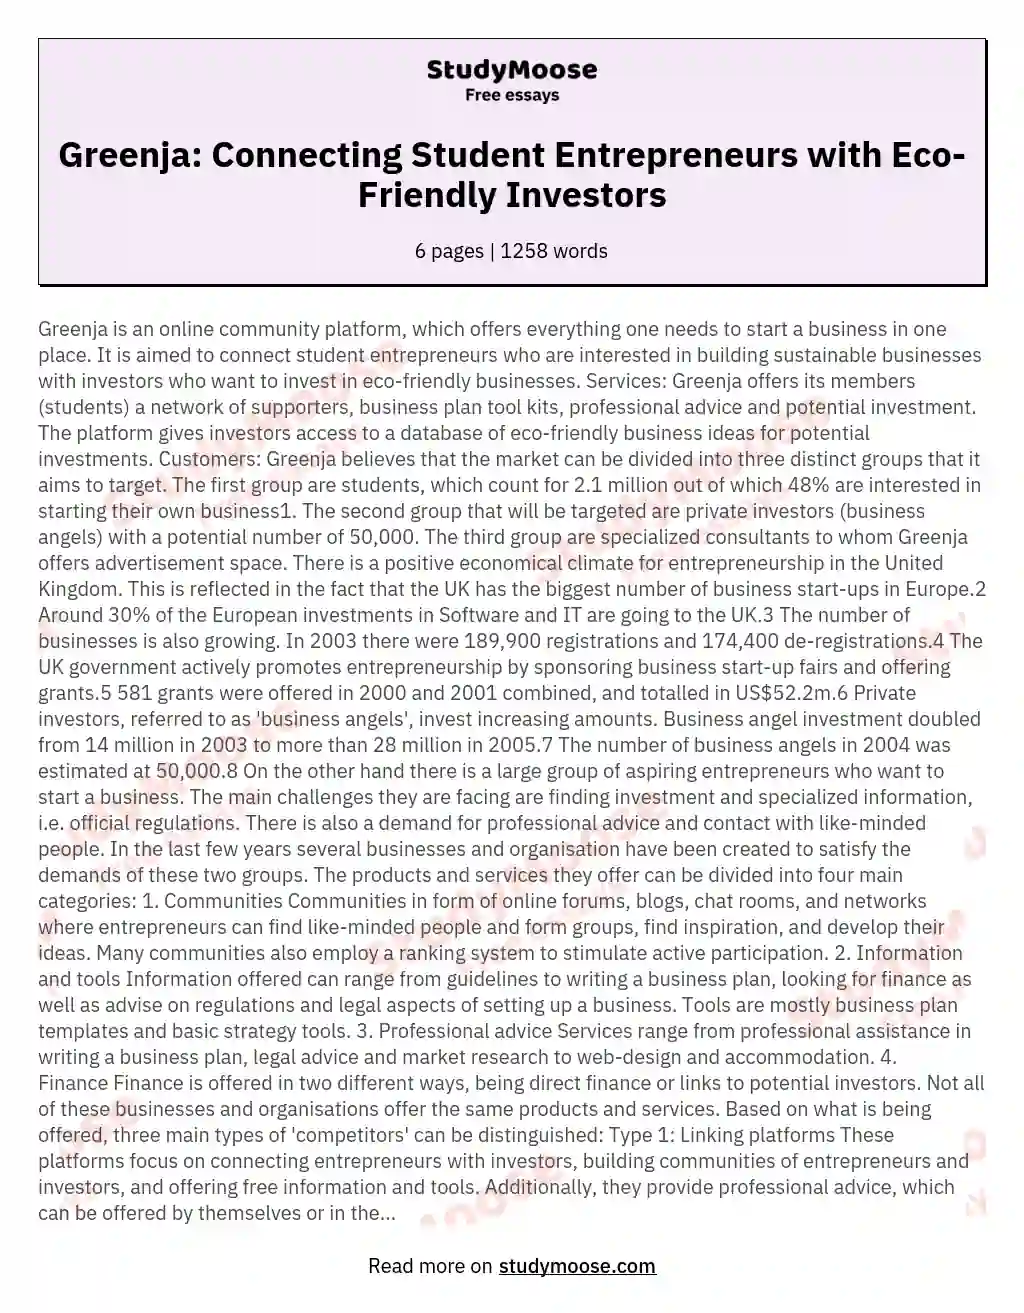 Greenja: Connecting Student Entrepreneurs with Eco-Friendly Investors essay